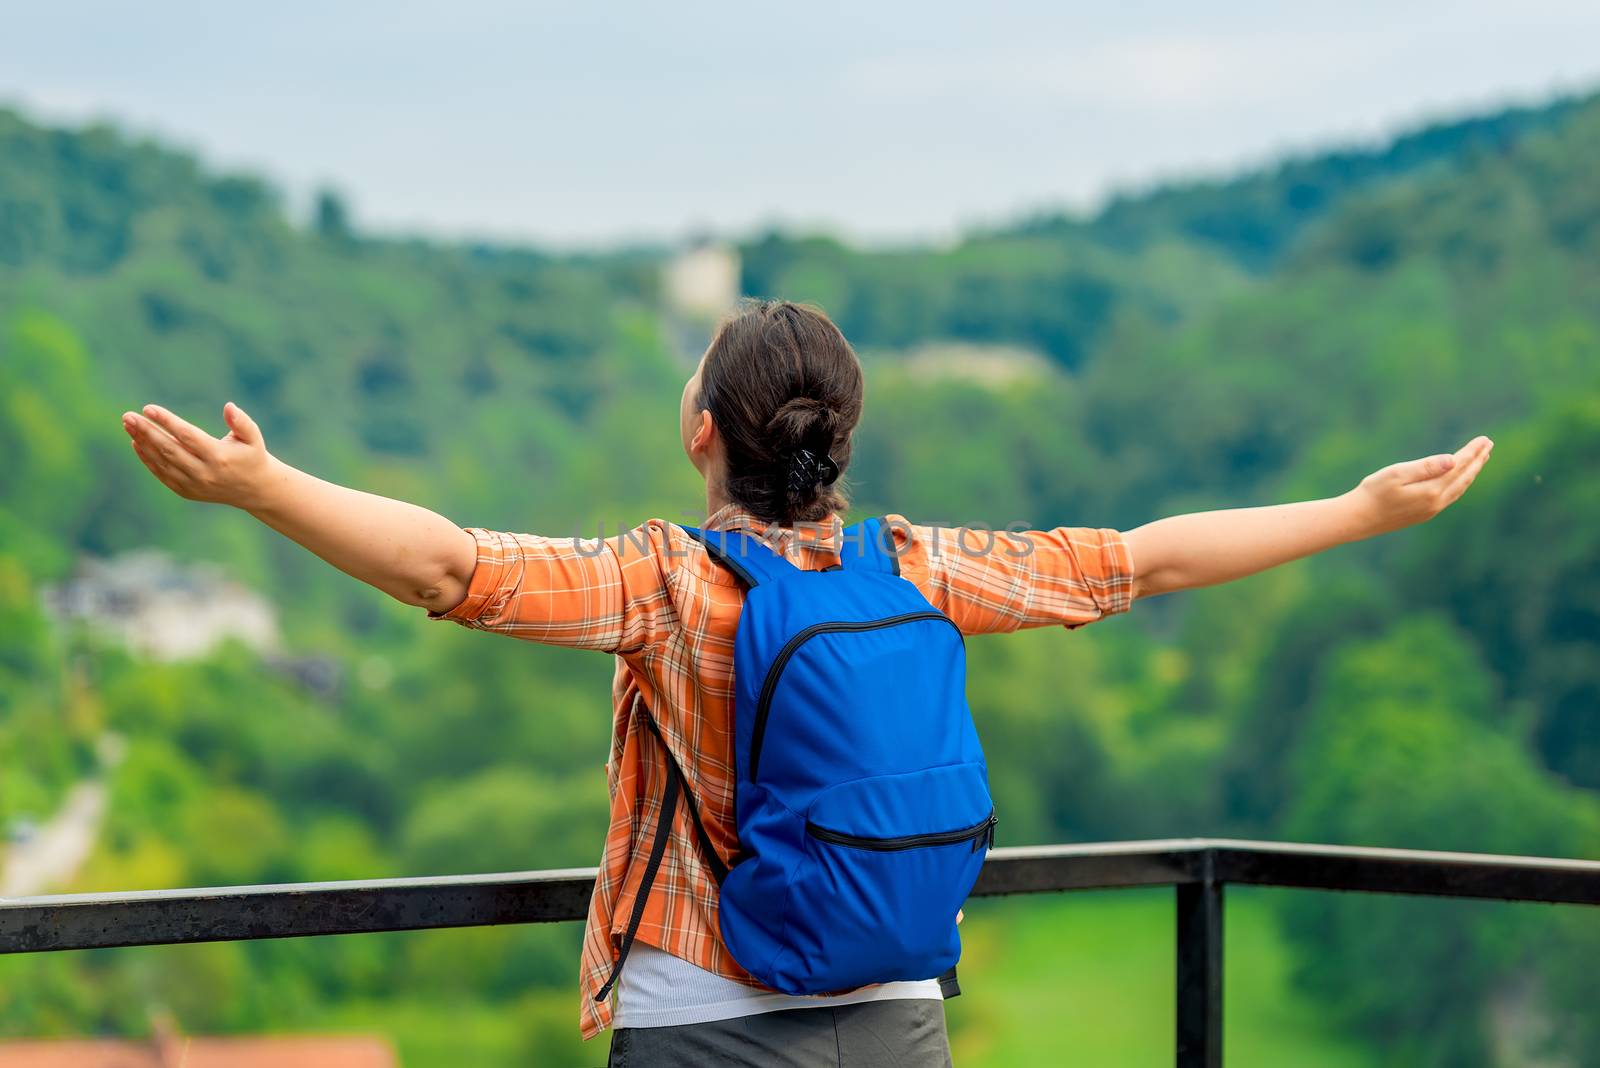 woman tourist with arms outstretched enjoys freedom in nature